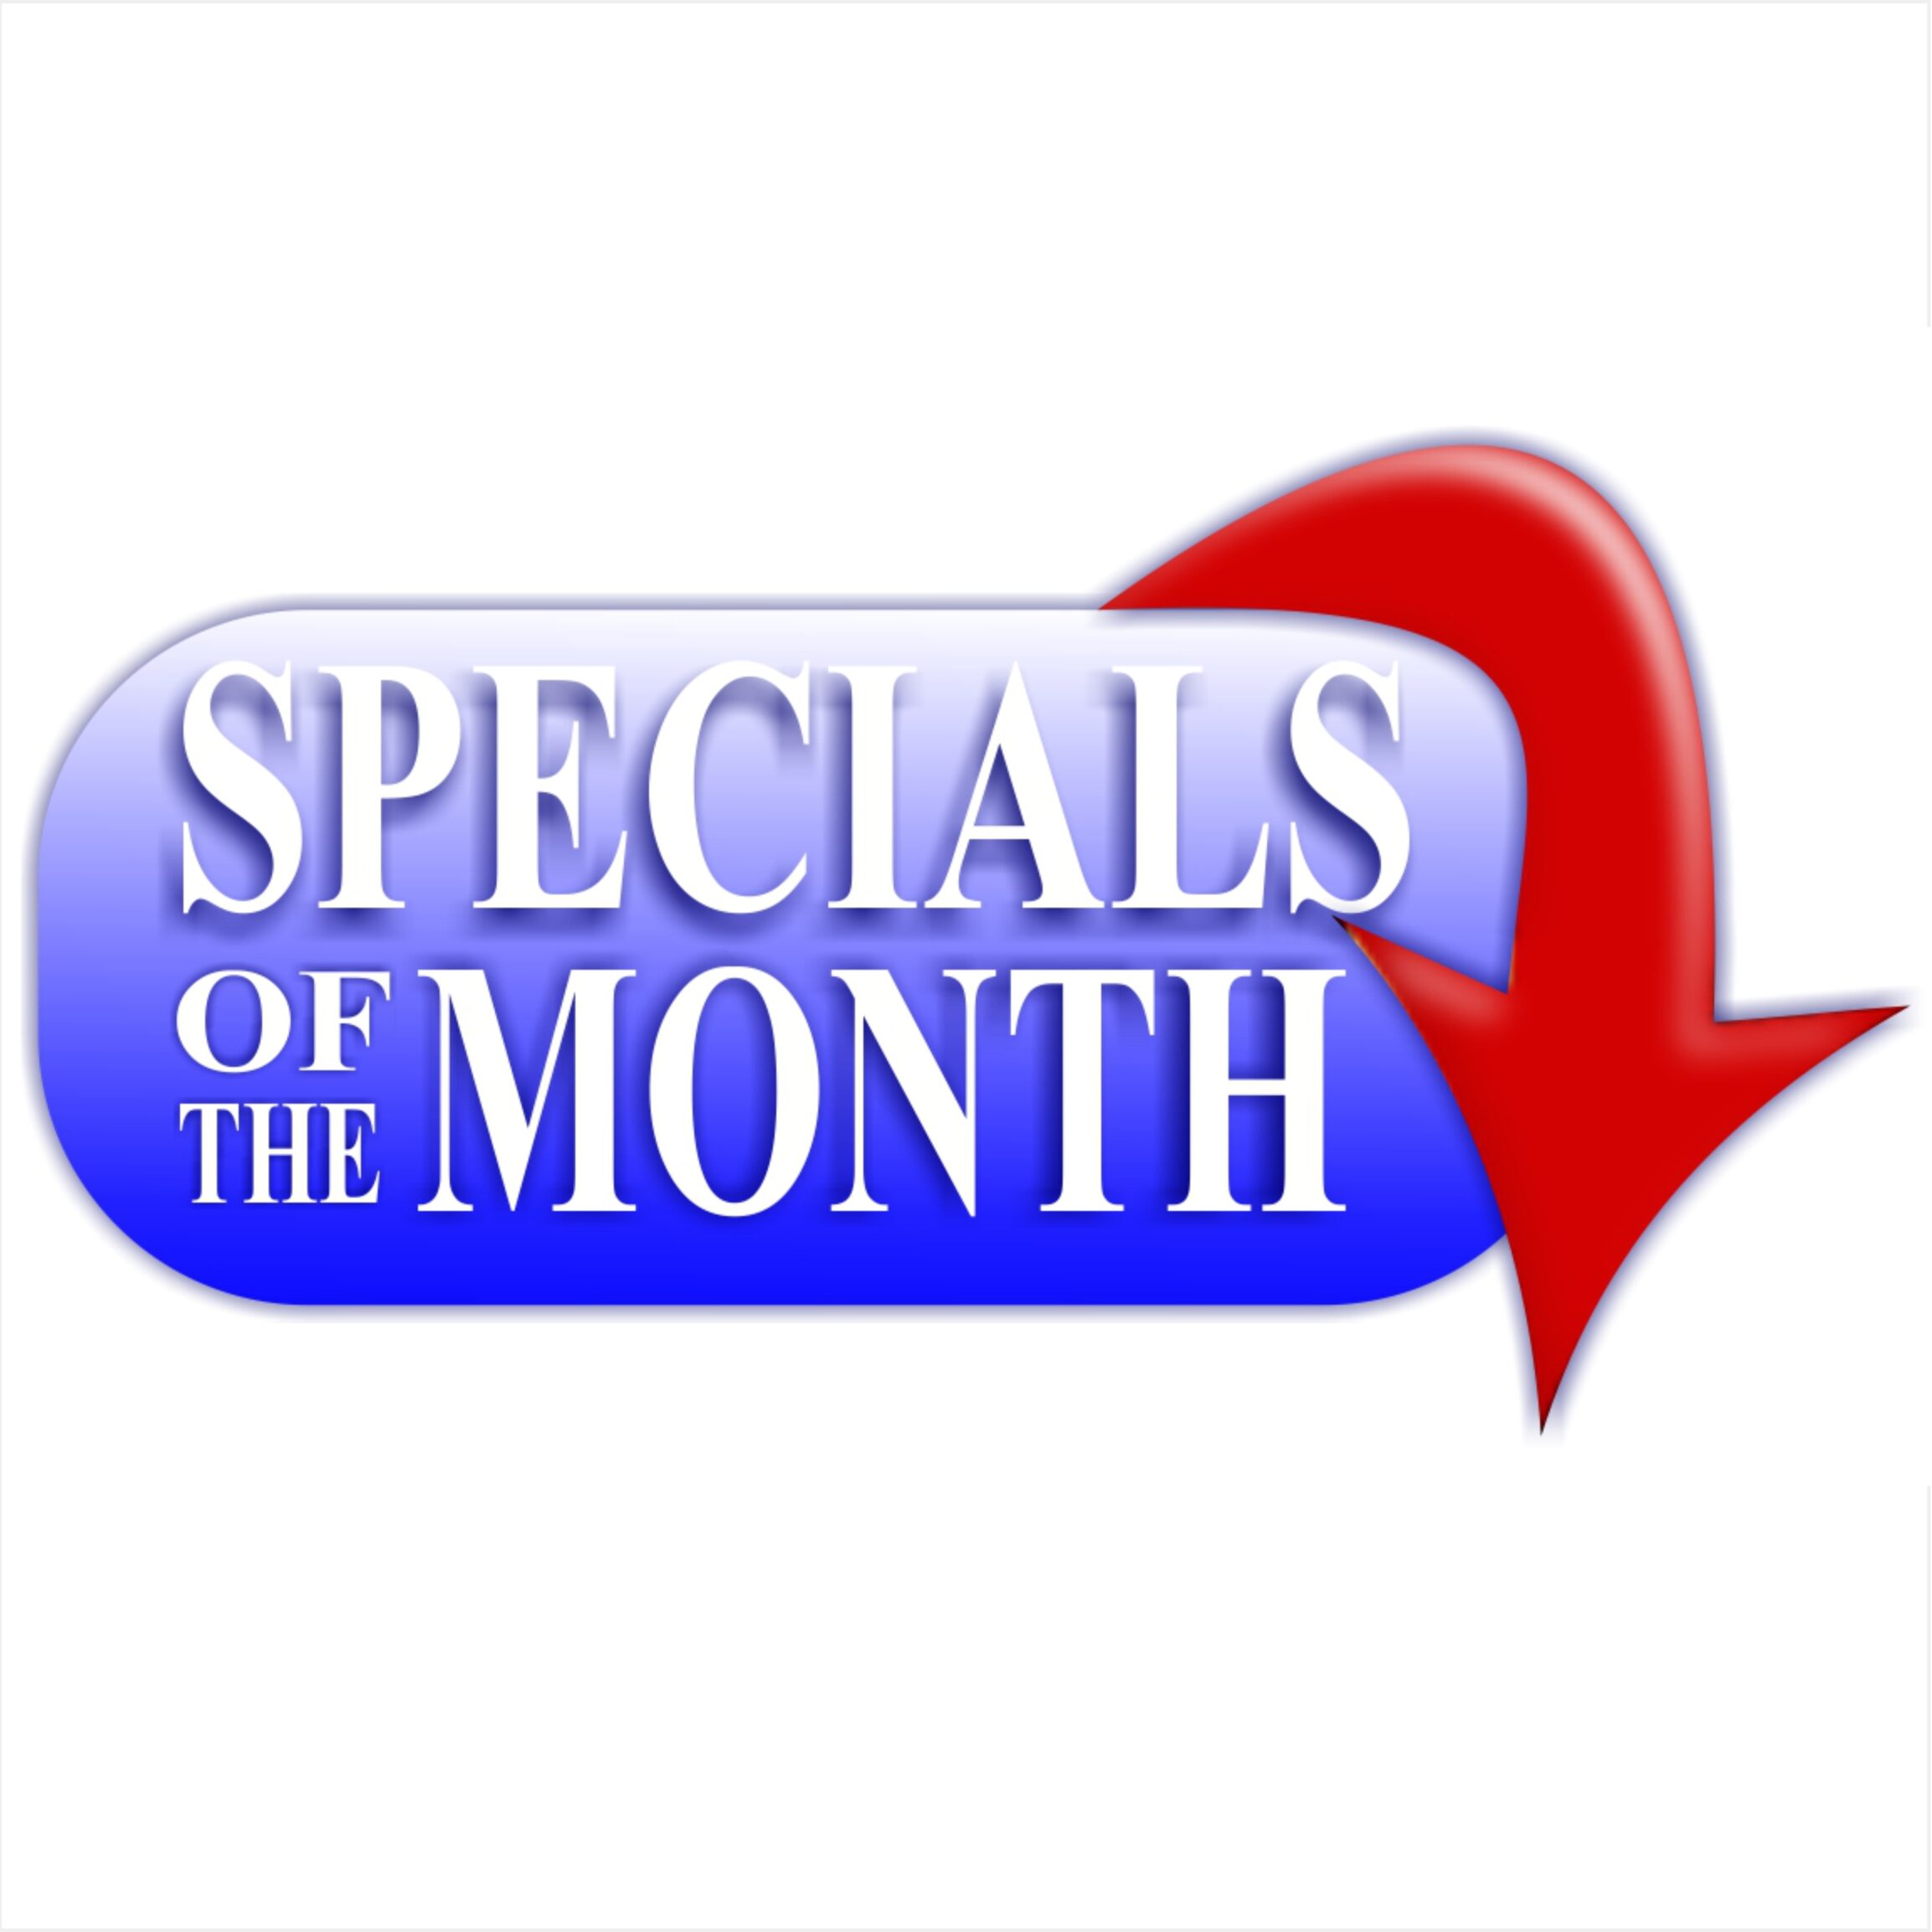 SPECIAL OF THE MONTH